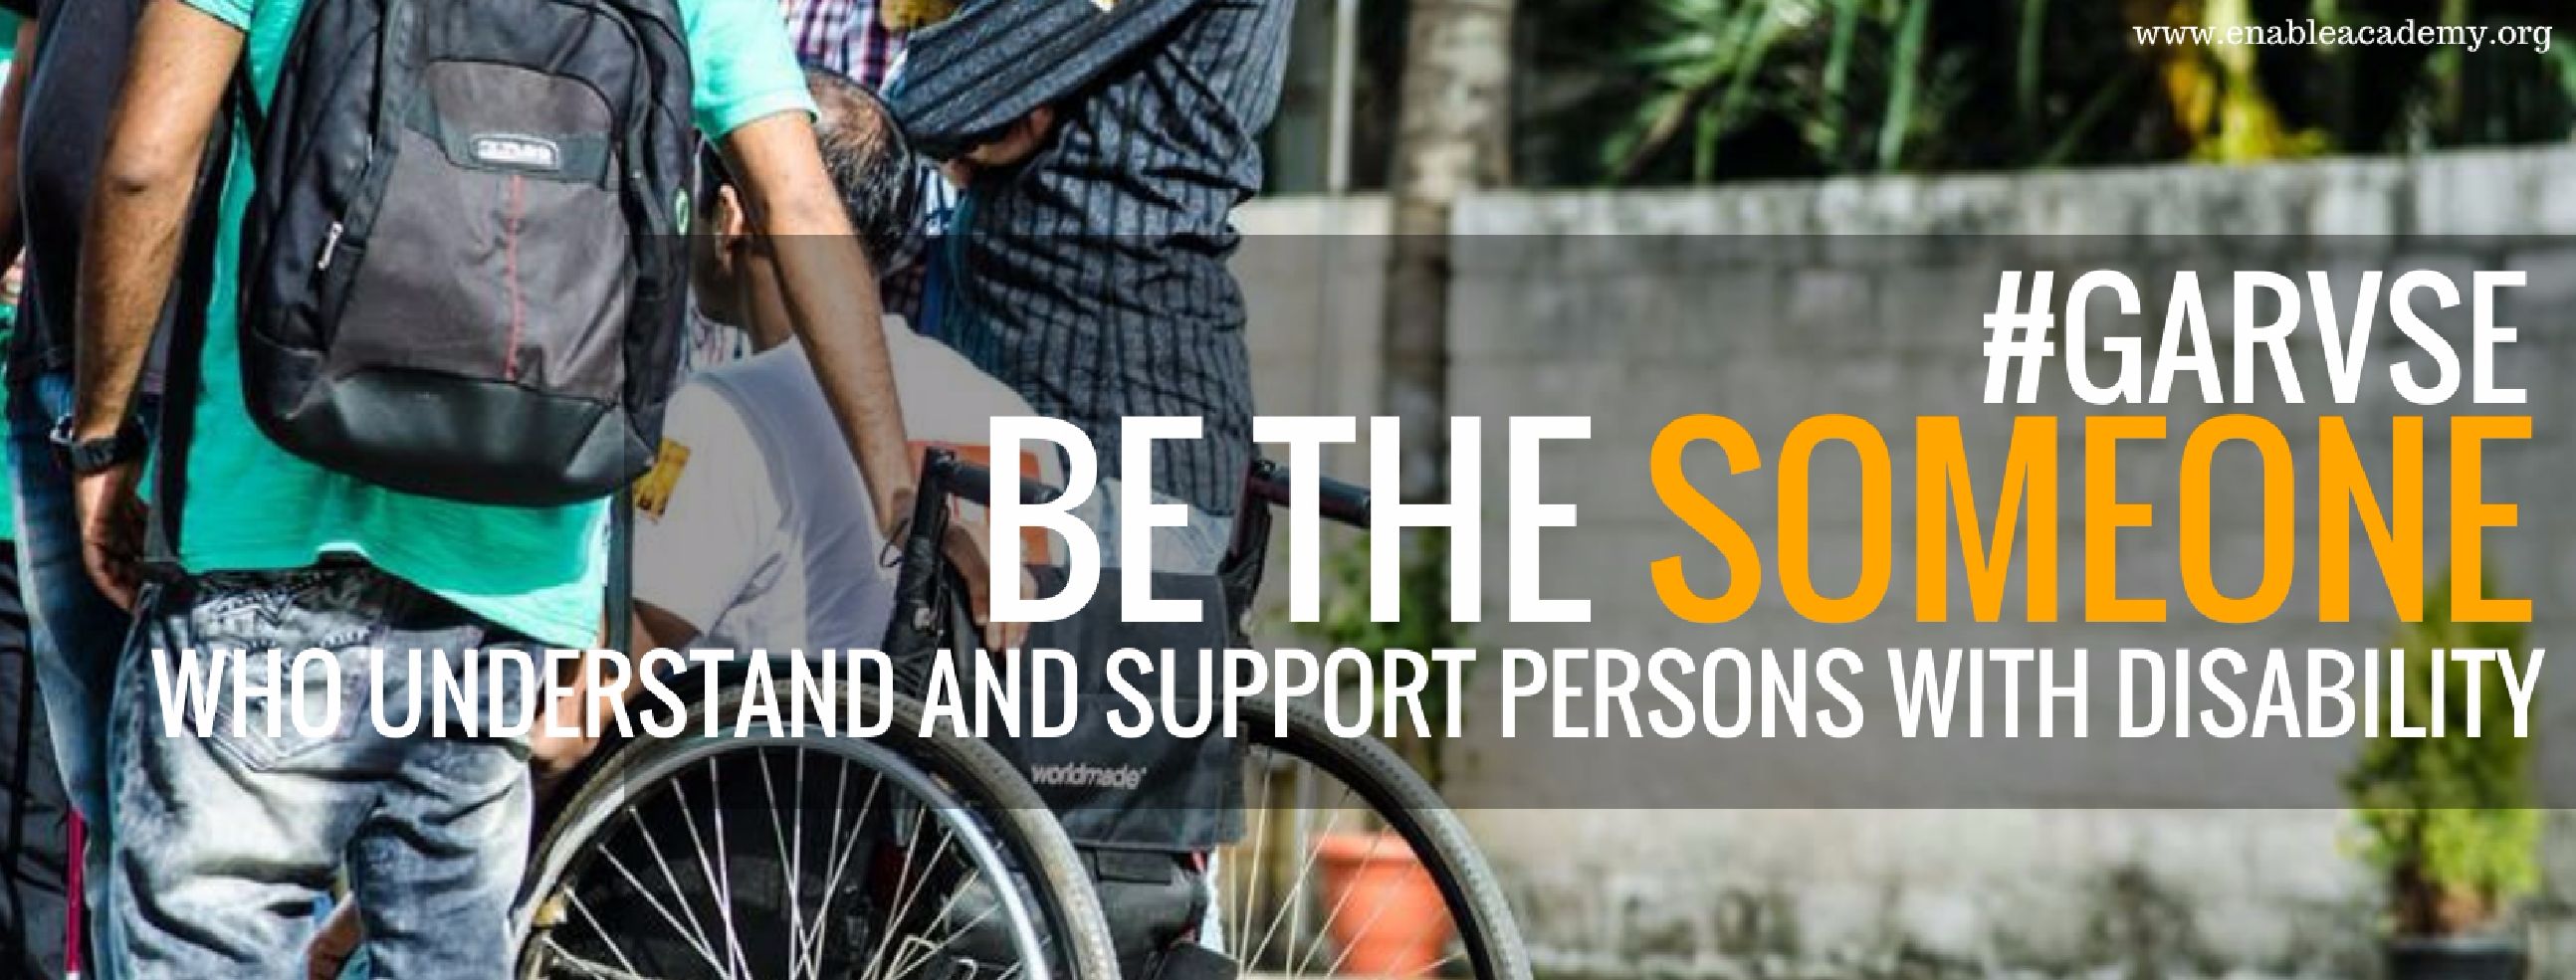 Garvese: Be the someone who understands and supports persons with disability. Picture shows the back of 3 people. Person in the middle is a person in a wheelchair.